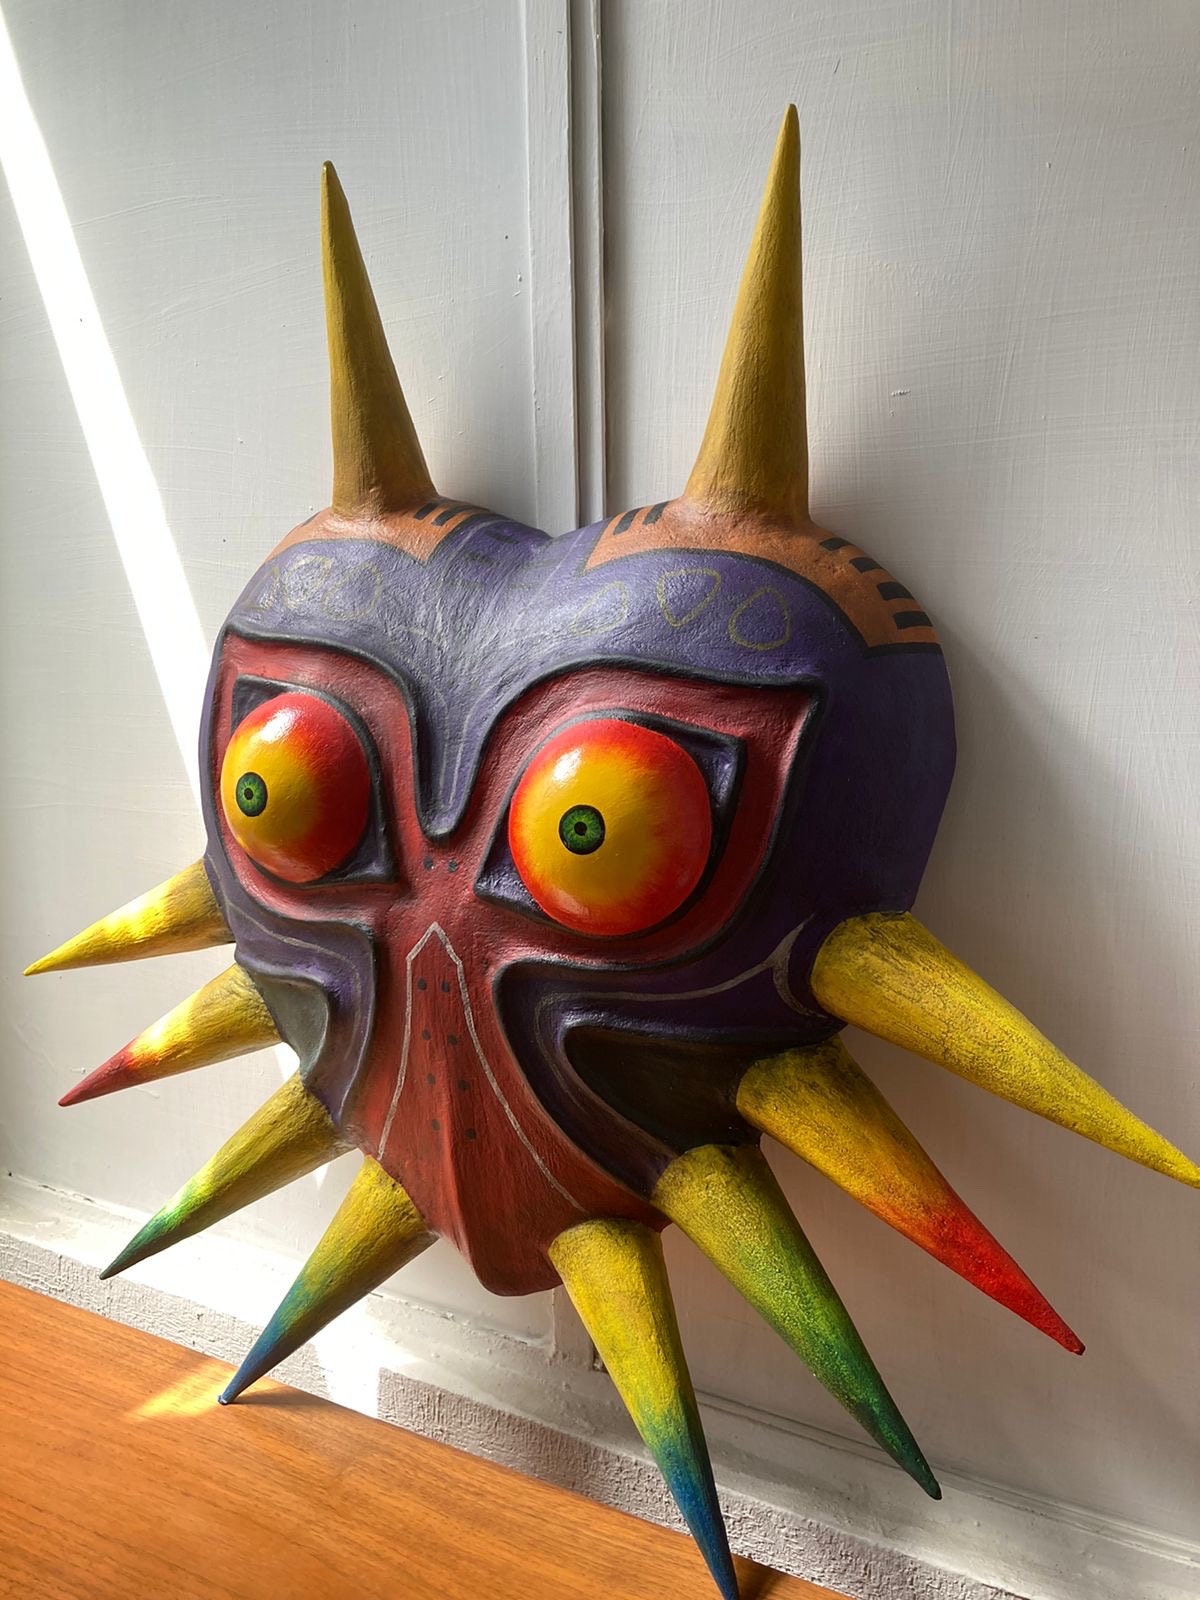 The Legend of Zelda: Majora's Mask - This unique mask holds a special significance due to its intricate design and the artistry involved